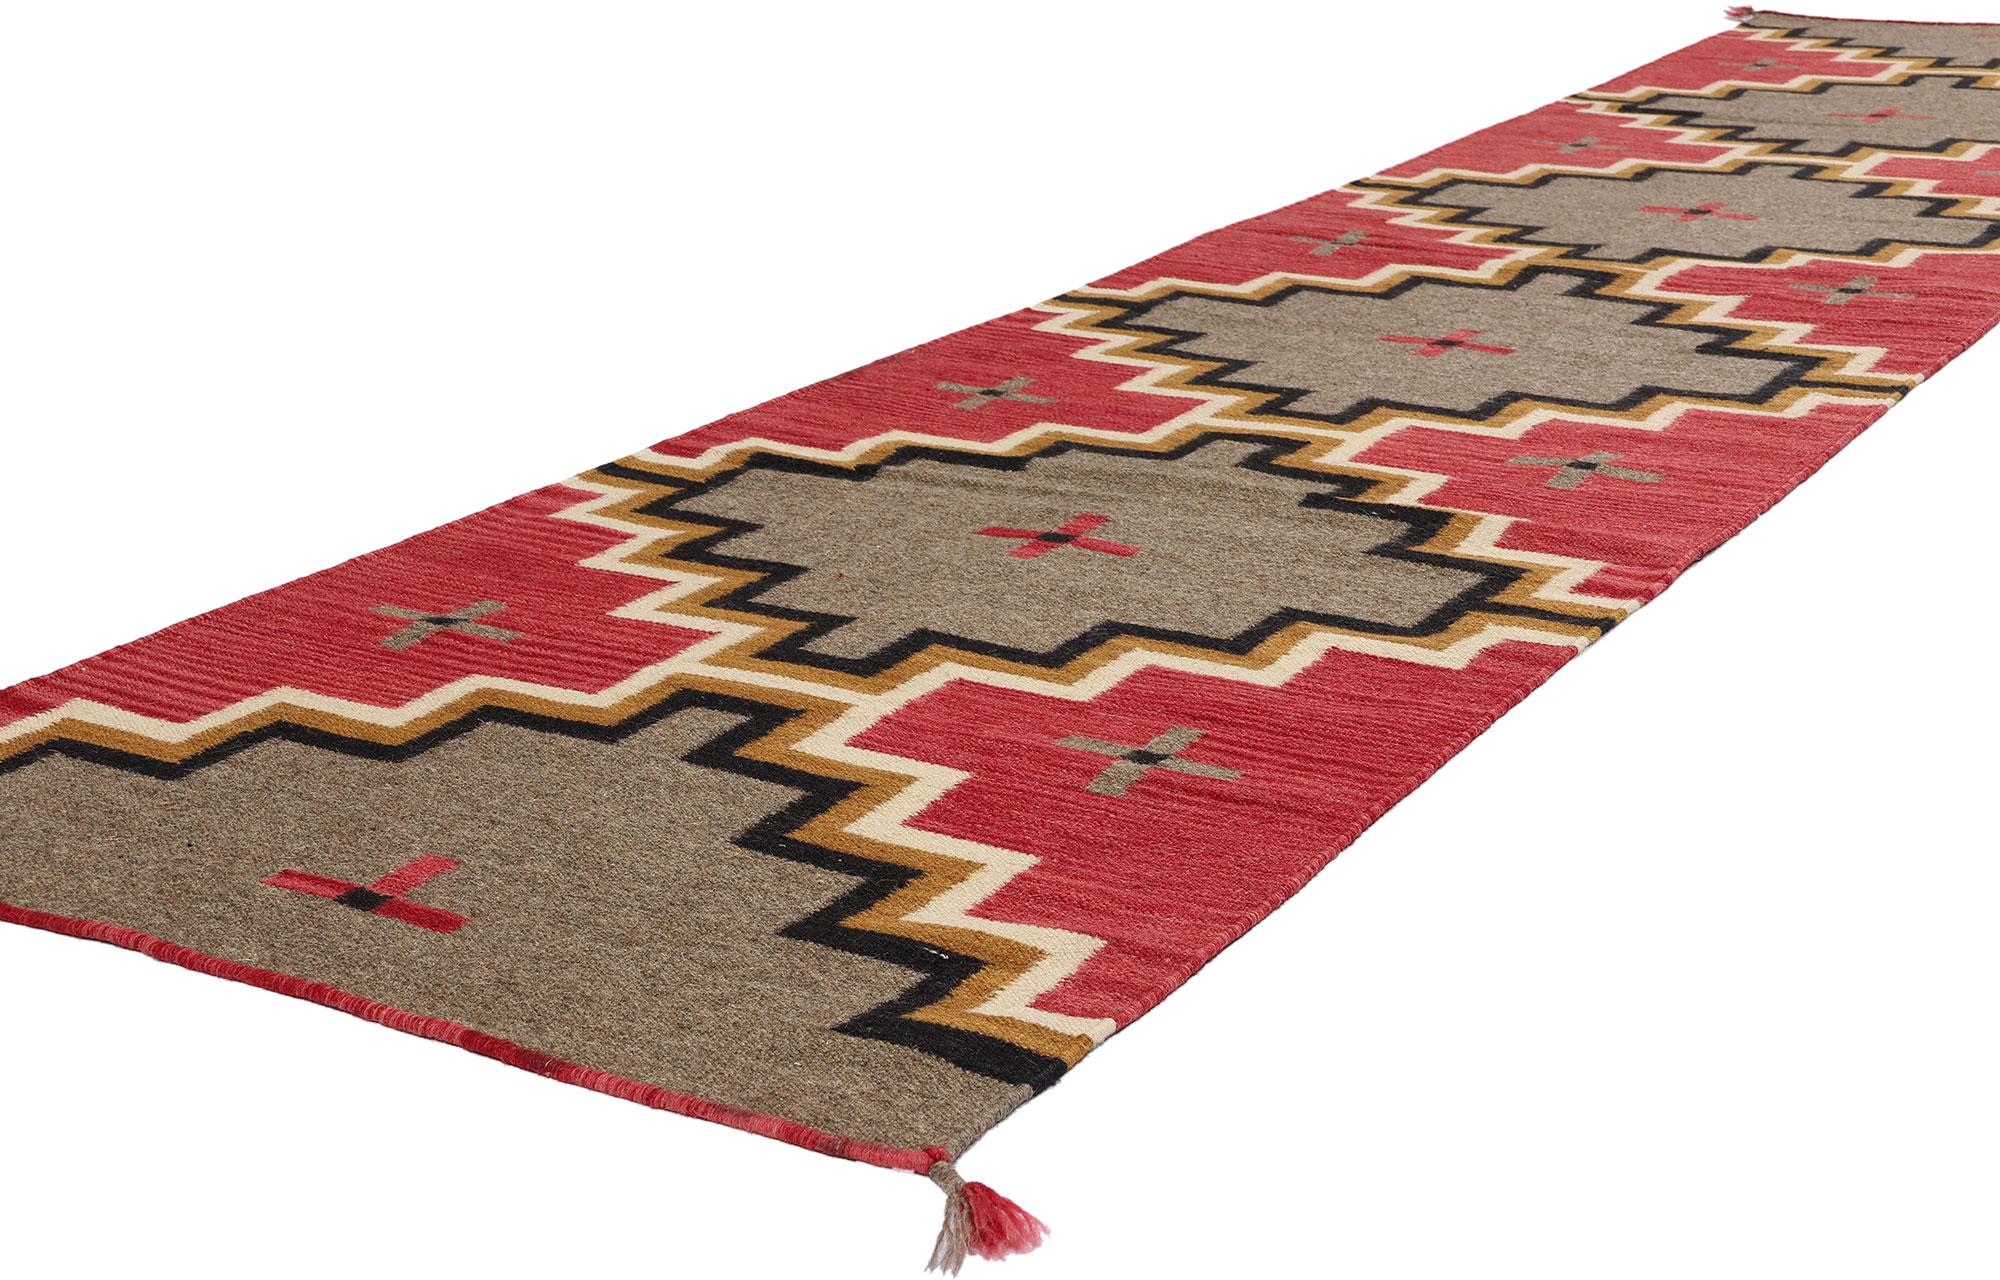 81047 Southwest Modern Ganado Navajo-Style Rug Runner, 02'07 x 11'11. Elevate your living space with the captivating allure of Southwest Modern aesthetics embodied in this meticulously handwoven wool Ganado Navajo-style rug runner. A seamless fusion